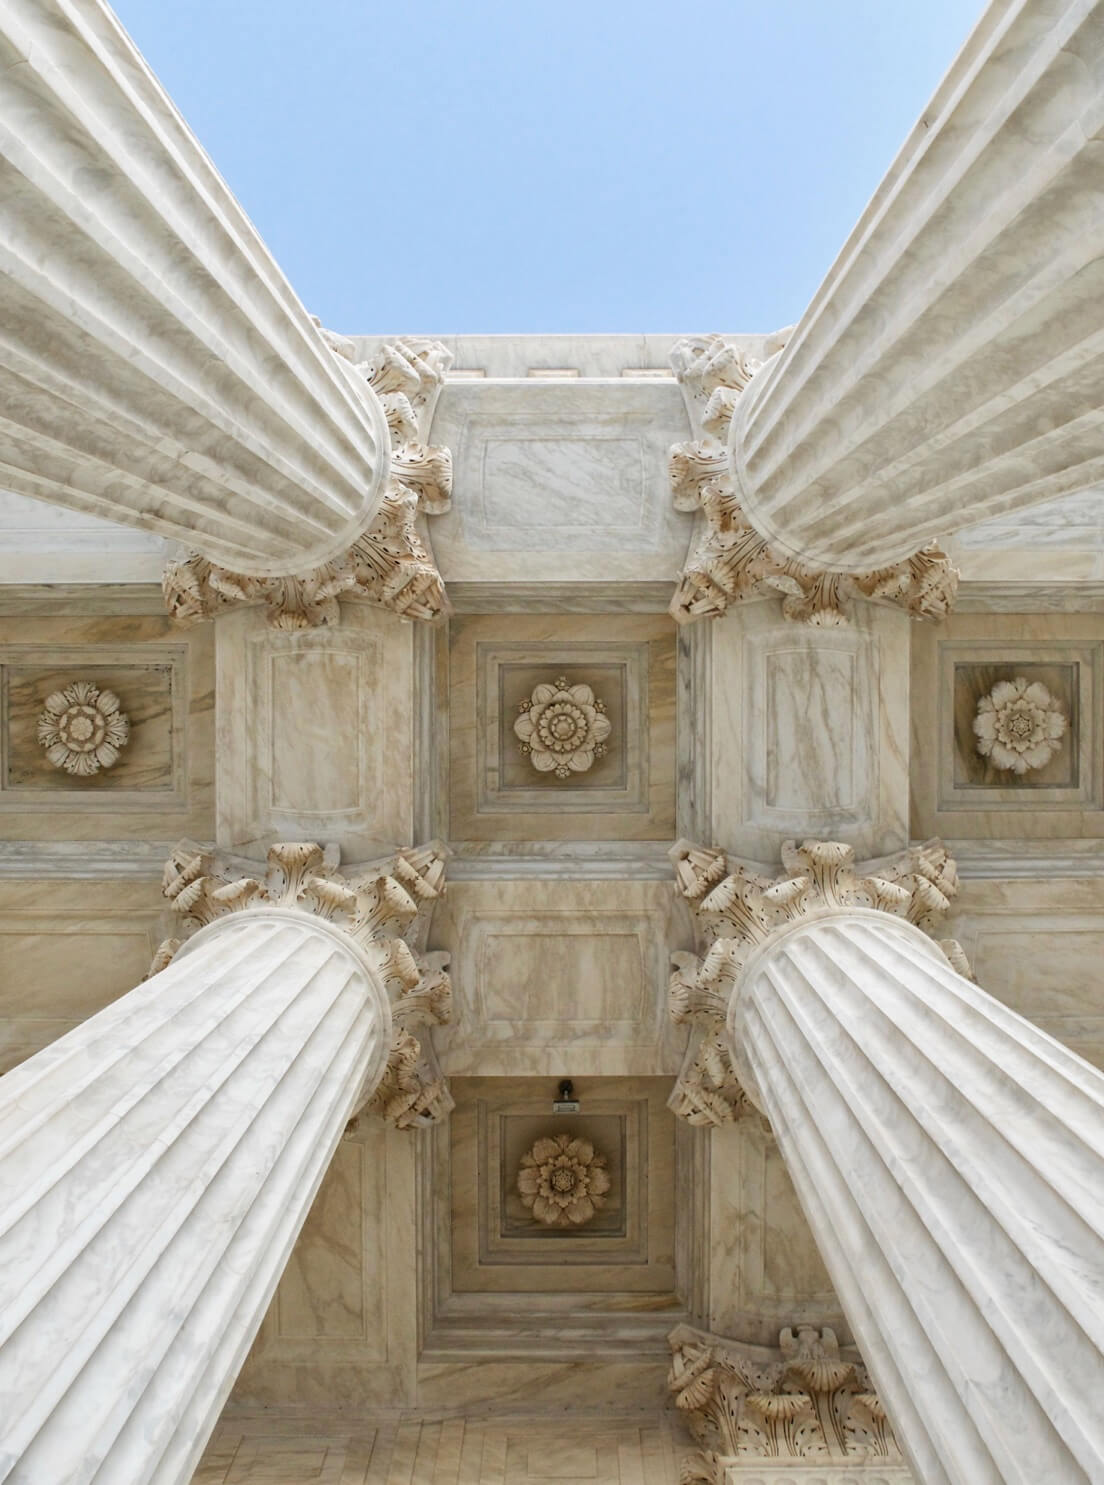 Photo of the pillars at the Supreme Court of the United States